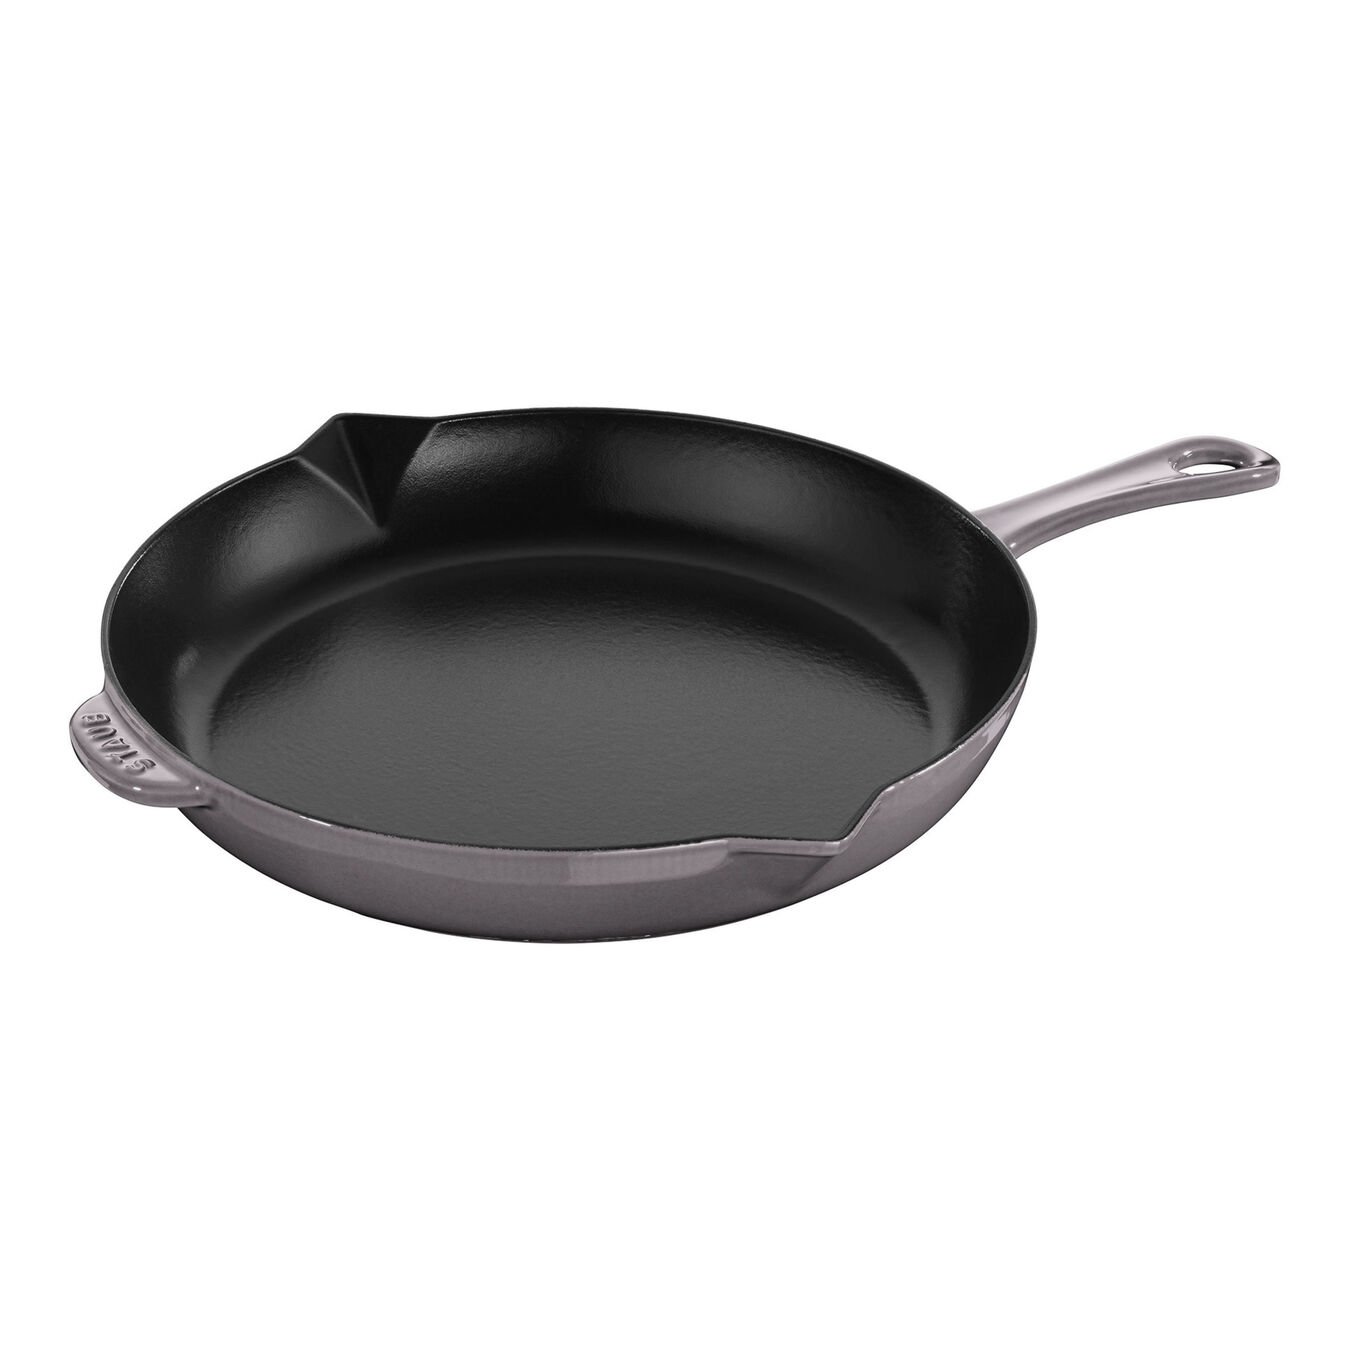 30 cm / 12 inch cast iron Frying pan, graphite-grey,,large 1